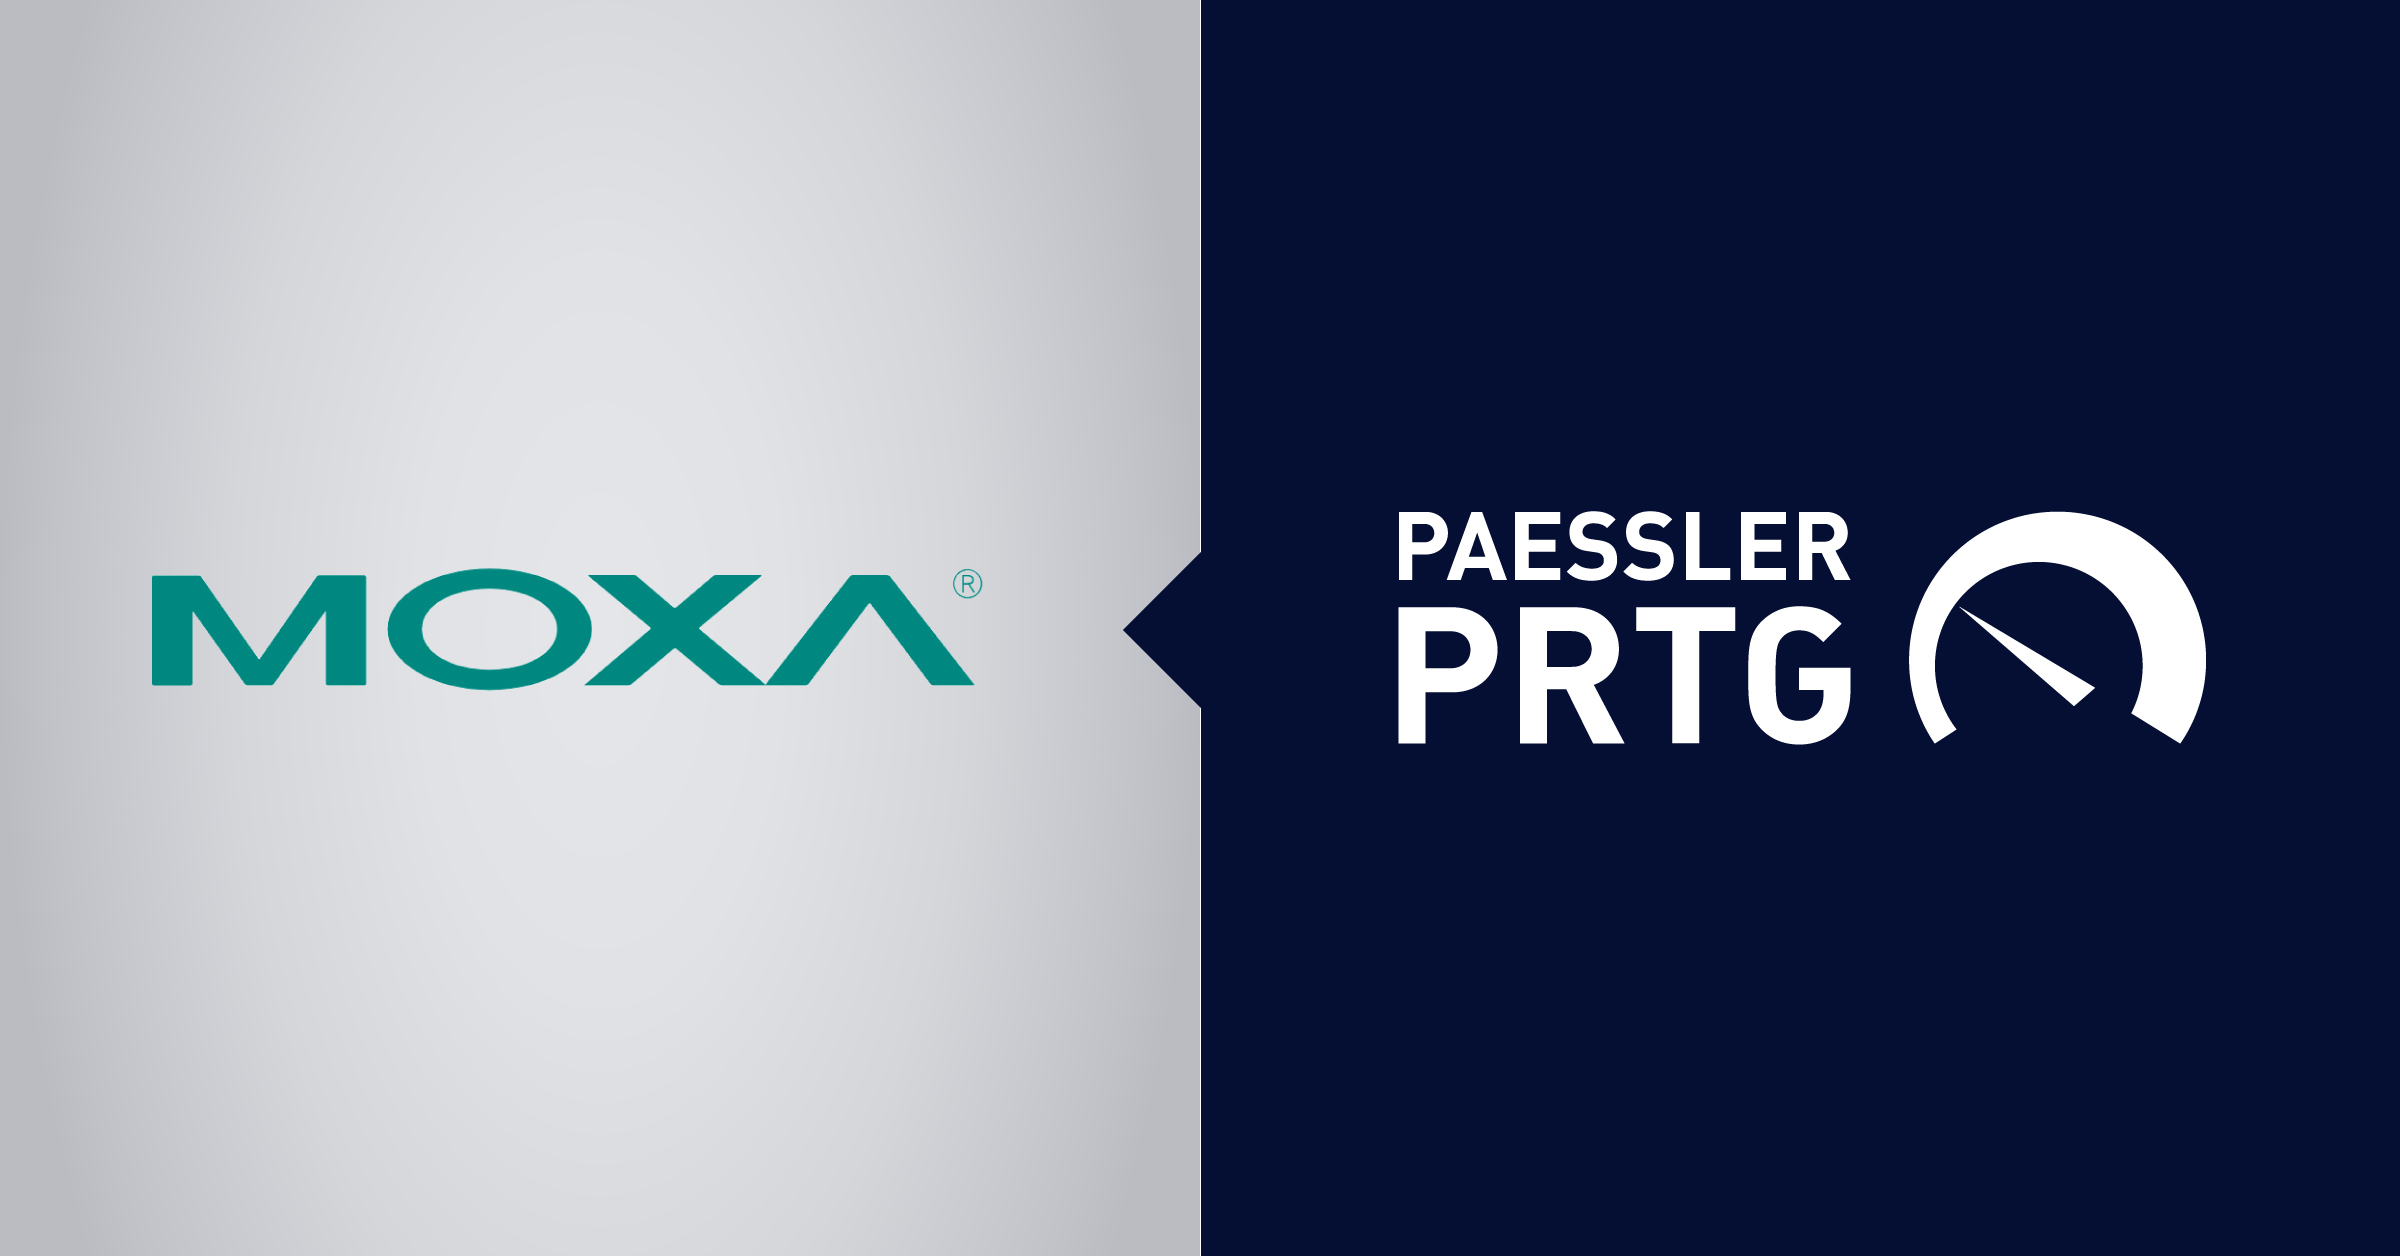 optimizing energy efficiency in data centers with moxa and prtg